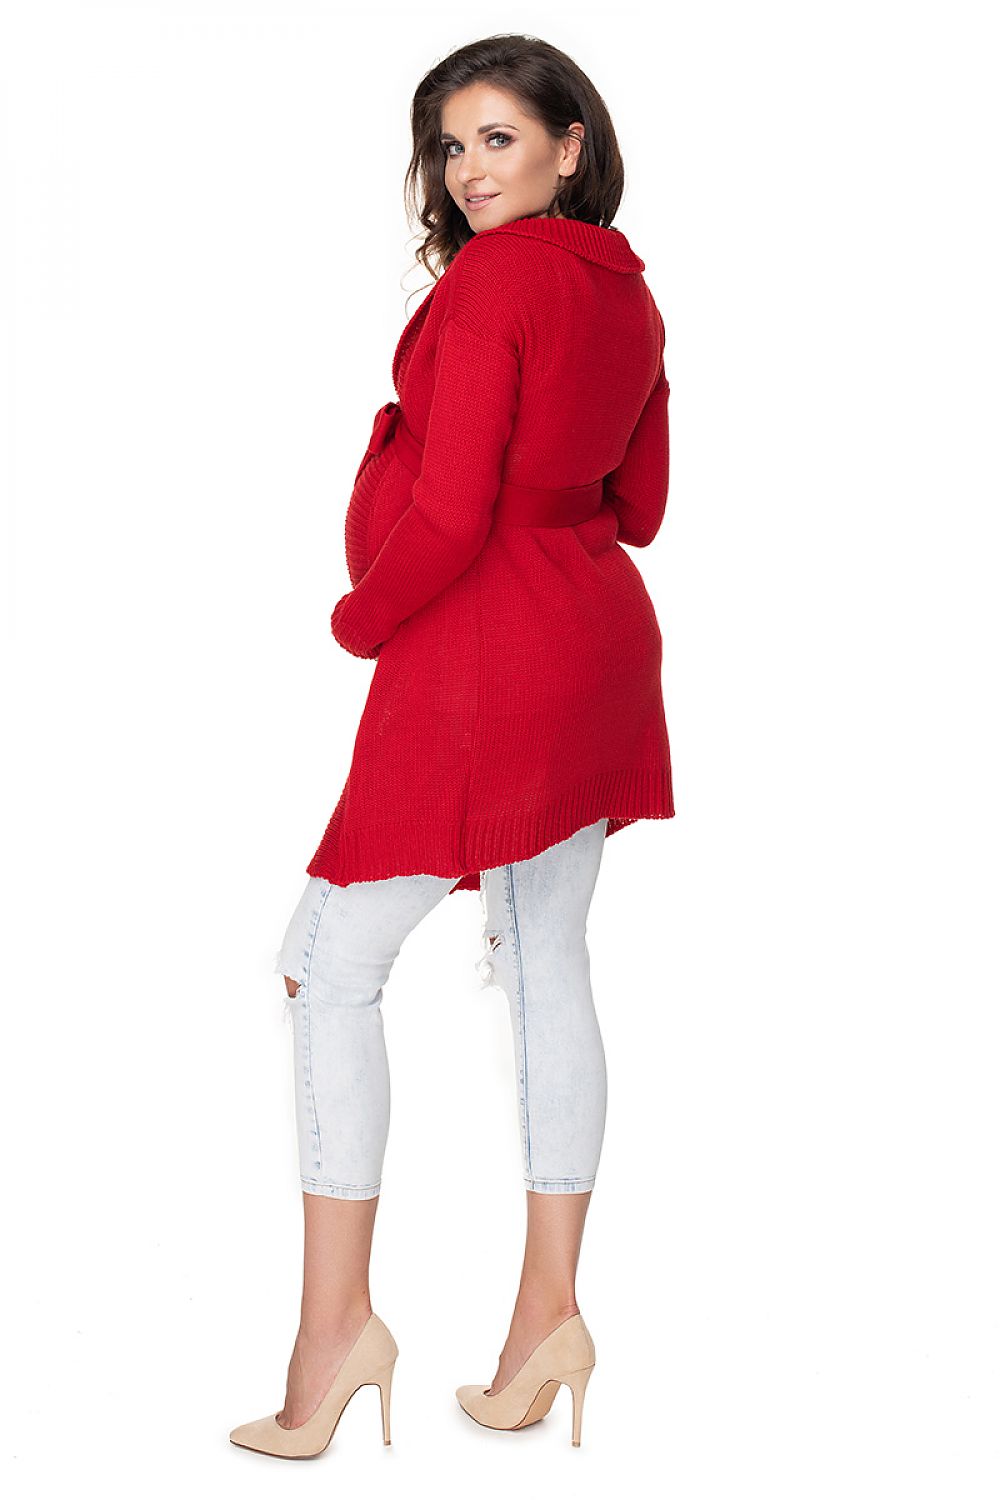 Cardigan model 138237 Red by PeeKaBoo - One Size - Cardigans